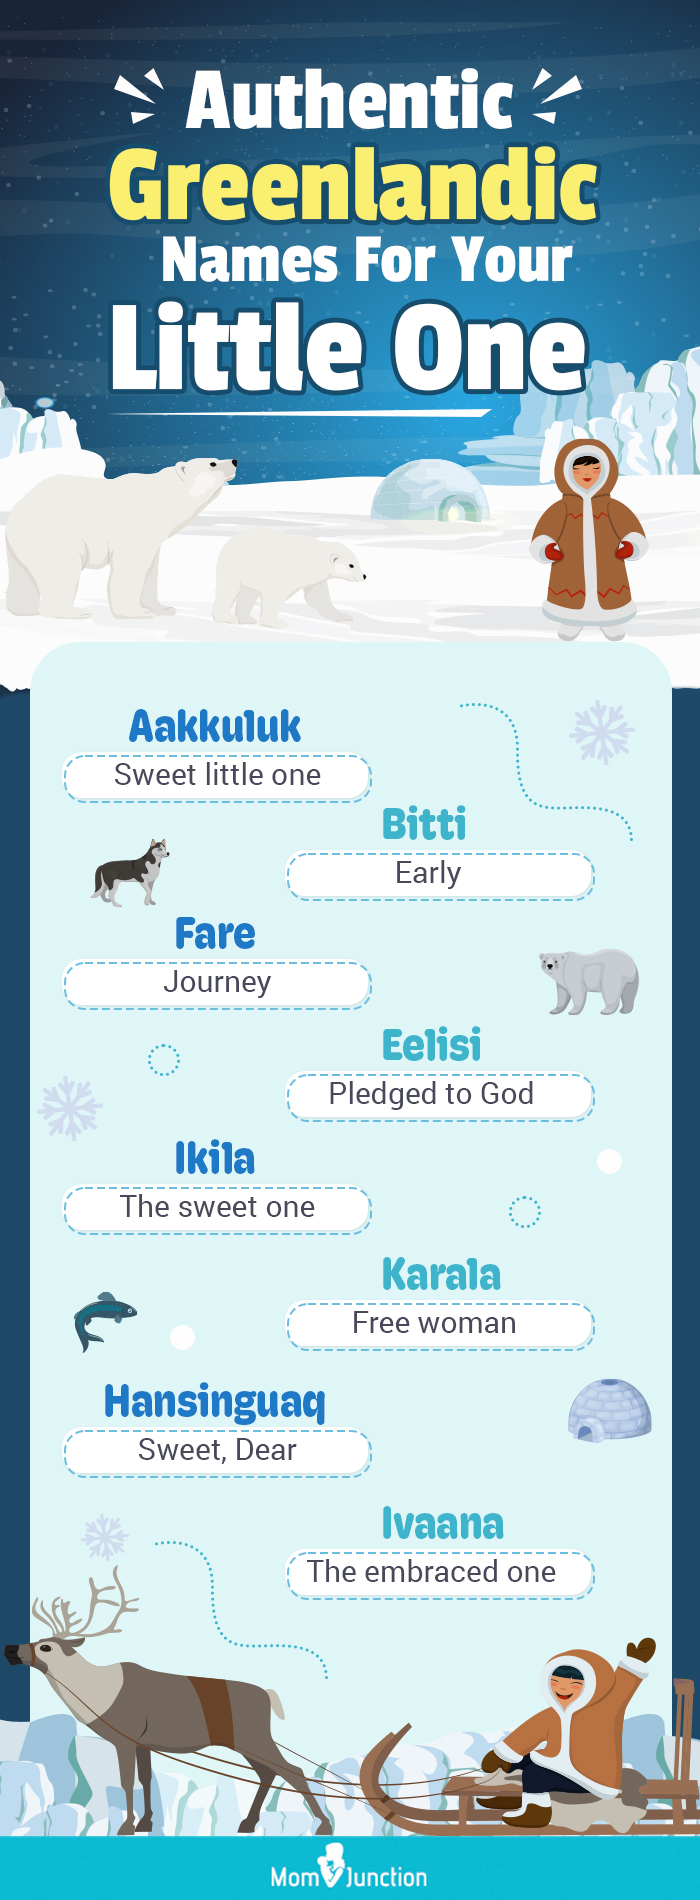 authentic greenlandic names for your little one (infographic)